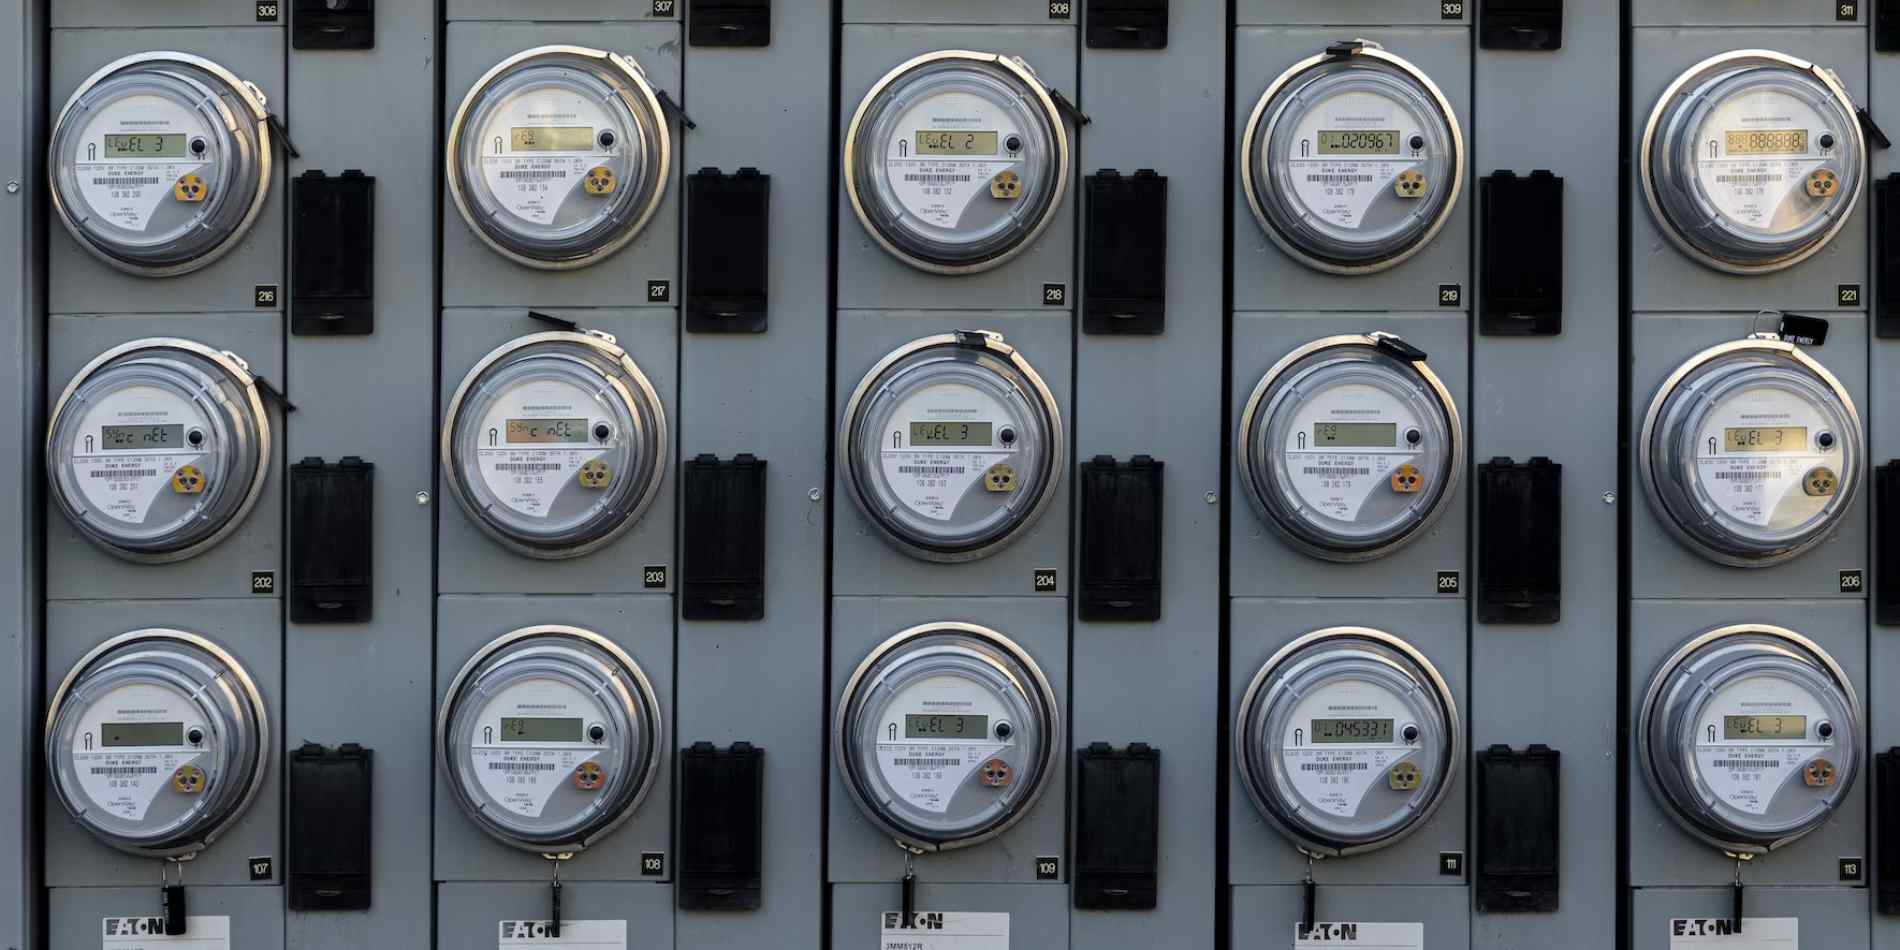 Utility meters showing kWh consumption